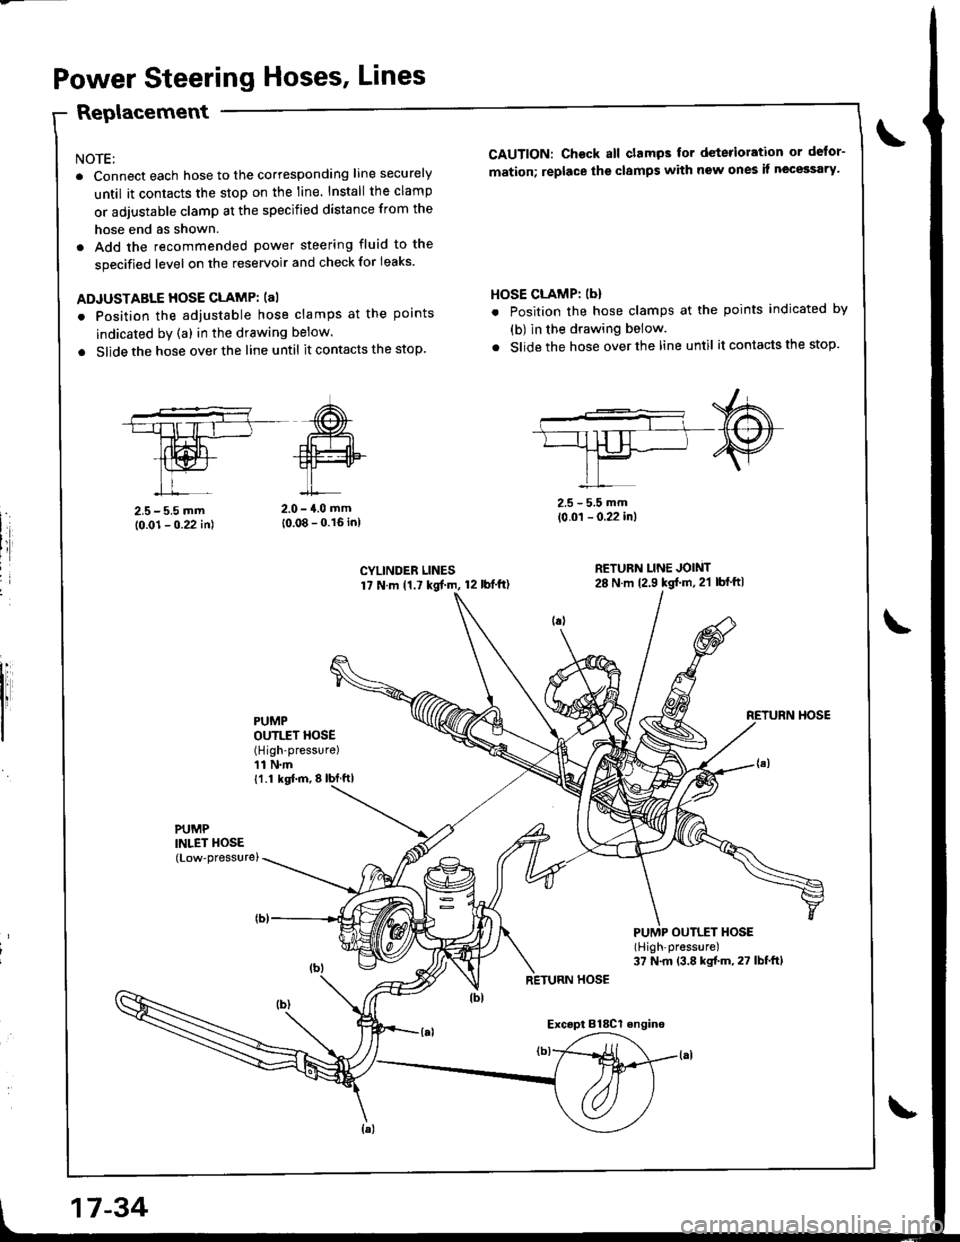 HONDA INTEGRA 1998 4.G User Guide Power Steering Hoses, Lines
Replacement
NOTE:
. Connect each hose to the corresponding line securely
until it contacts the stop on the line. Install the clamp
or adjustable clamp at the specified dist